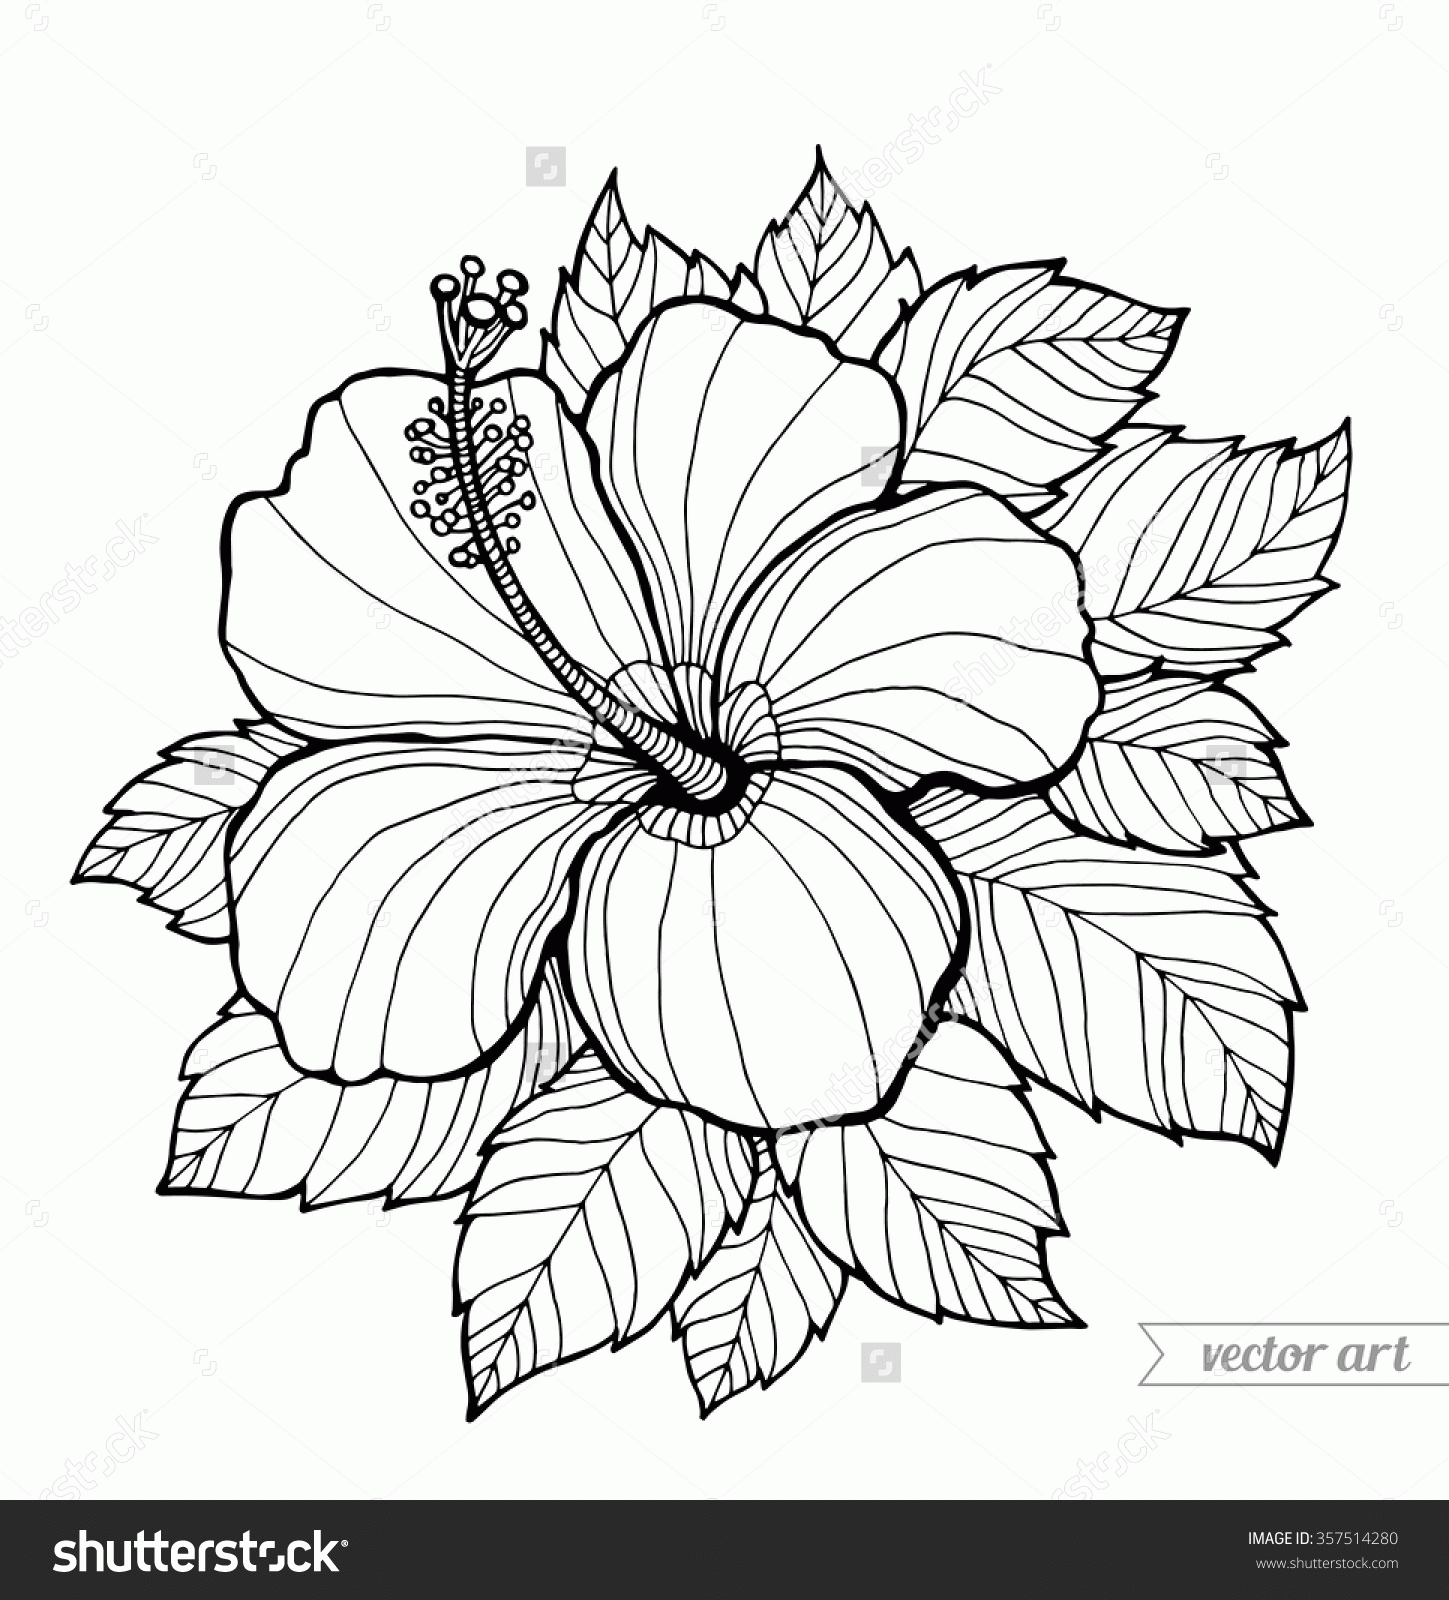 Free Coloring Pages Of Hibiscus Flowers - Coloring Home